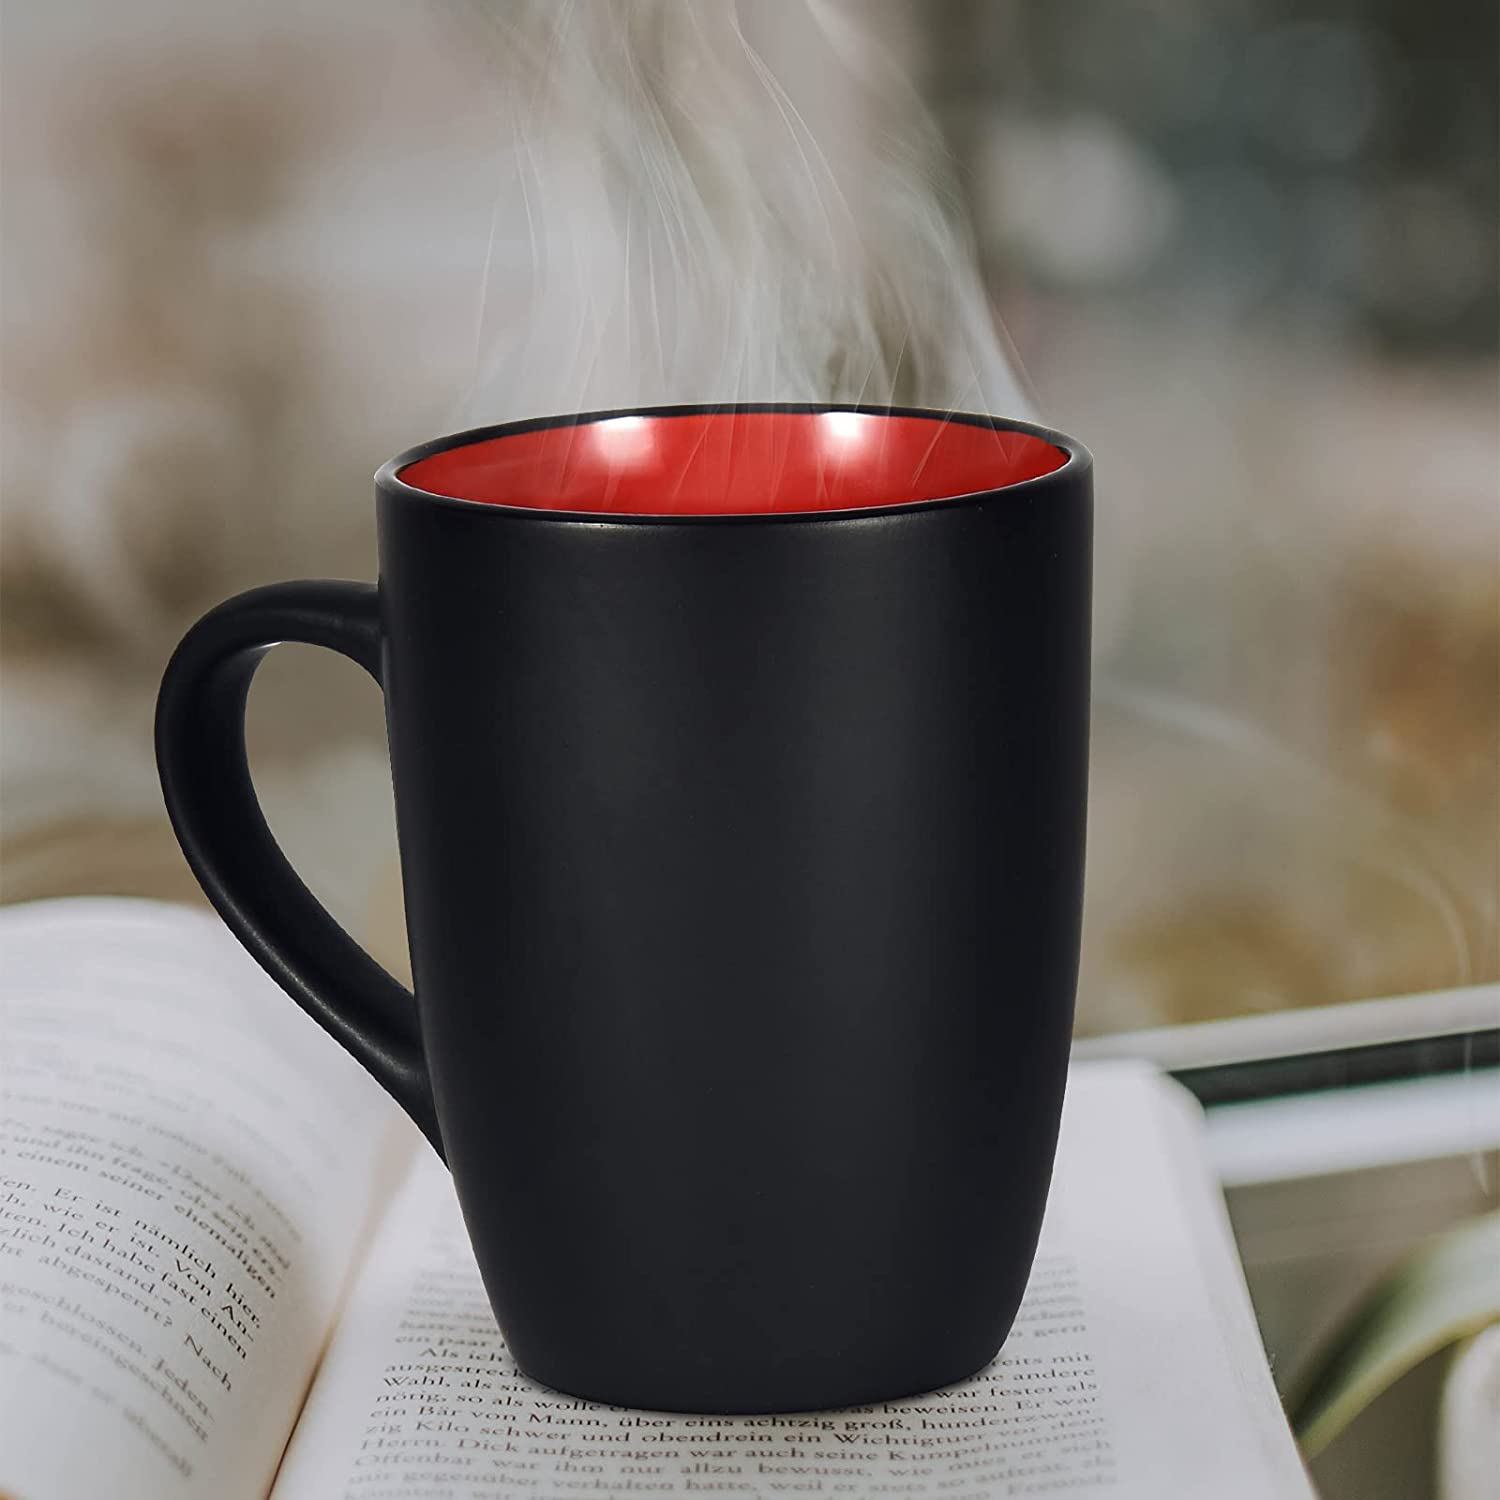 Modwnfy 16 fl oz Red Coffee Mugs Ceramic Coffee Mug Tea Cups, Black Exterior Red Color Interior Ceramic Coffee Mugs, Large Ceramic Coffee Cup for Coffee, Tea, Cocoa, Cereal, Office and Home - image 4 of 10